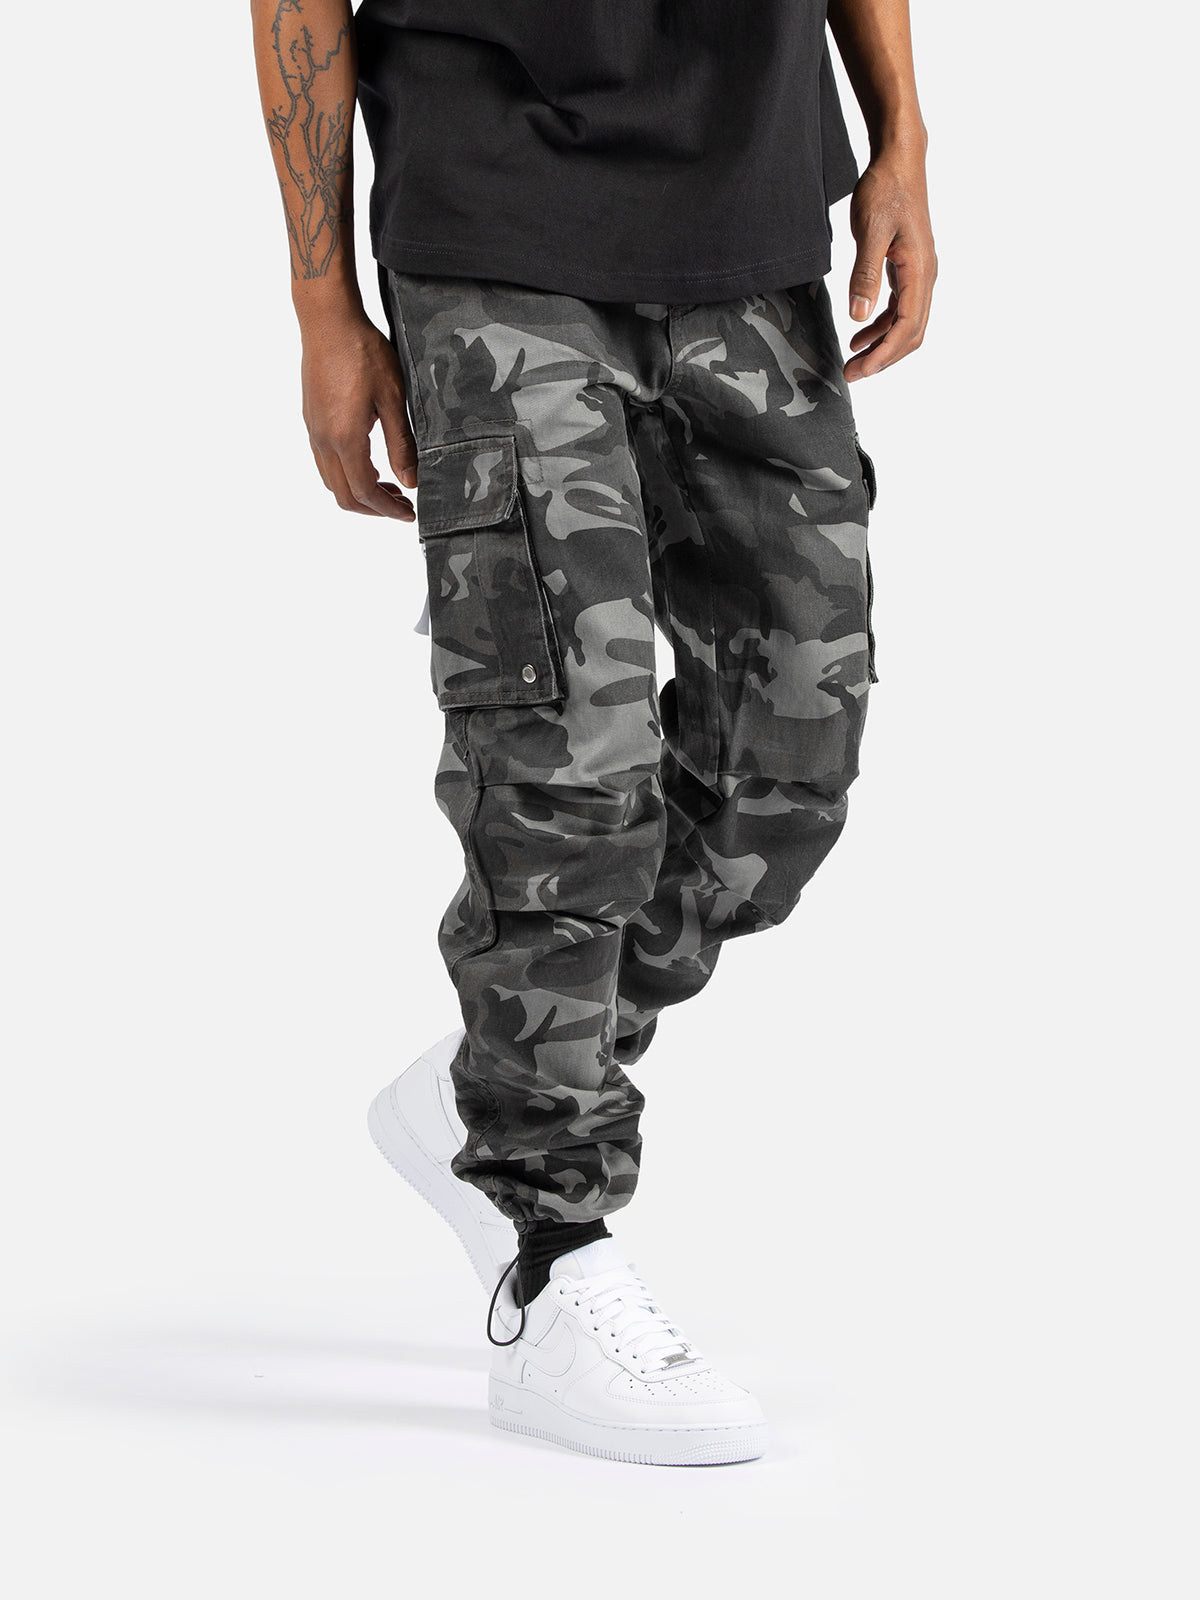 Camouflage Shorts Outfits For Men (60 ideas & outfits)